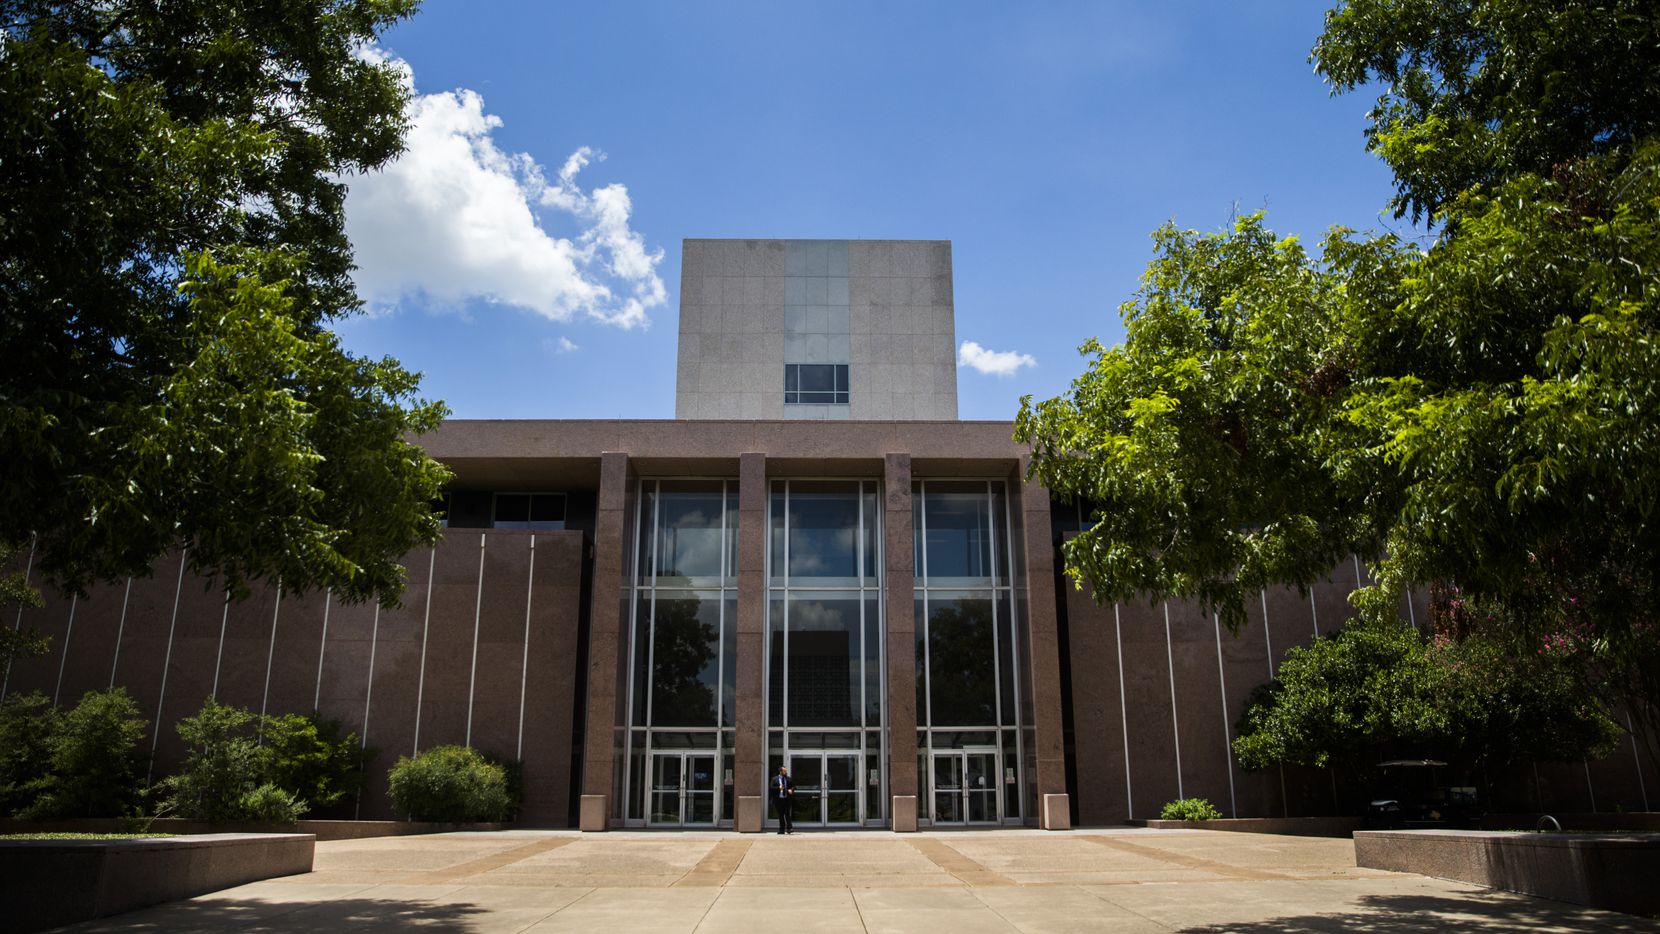 The Texas Court of Criminal Appeals building